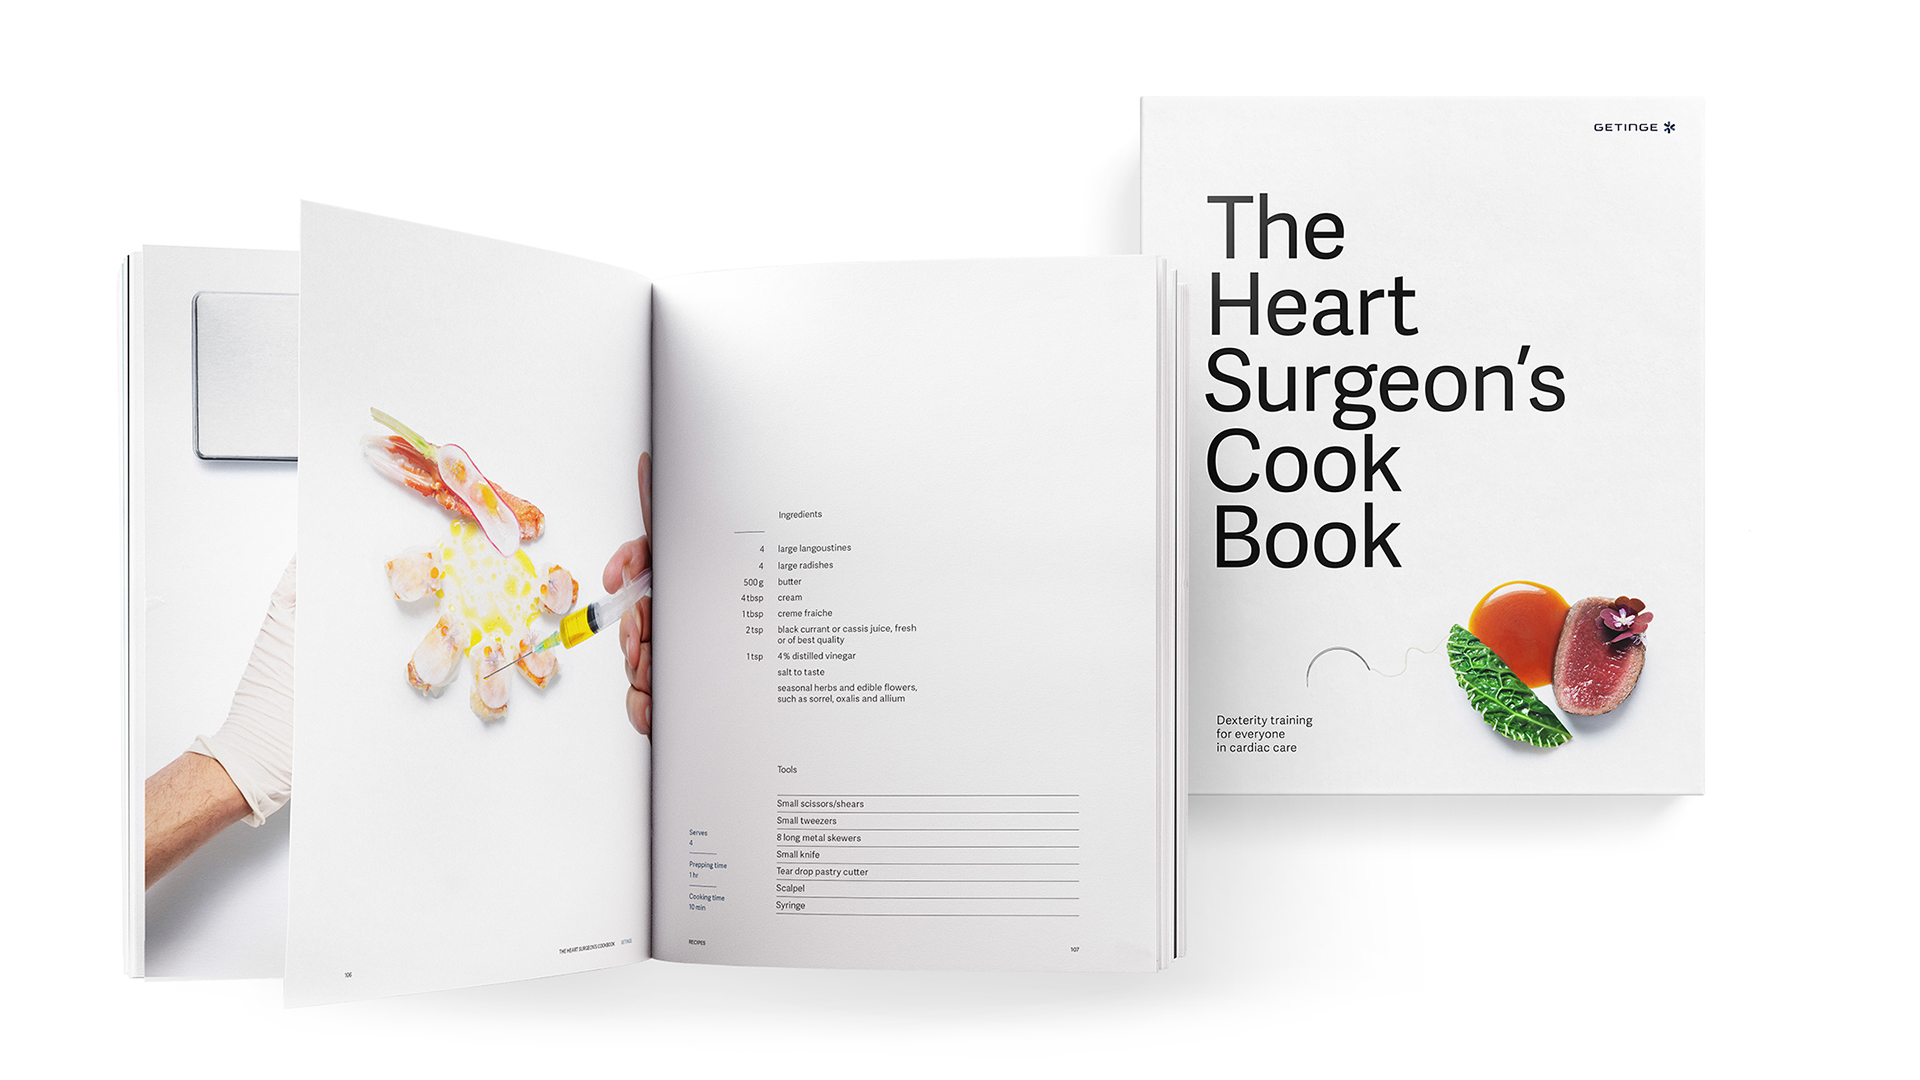 The Heart Surgeon's Cookbook by Getinge